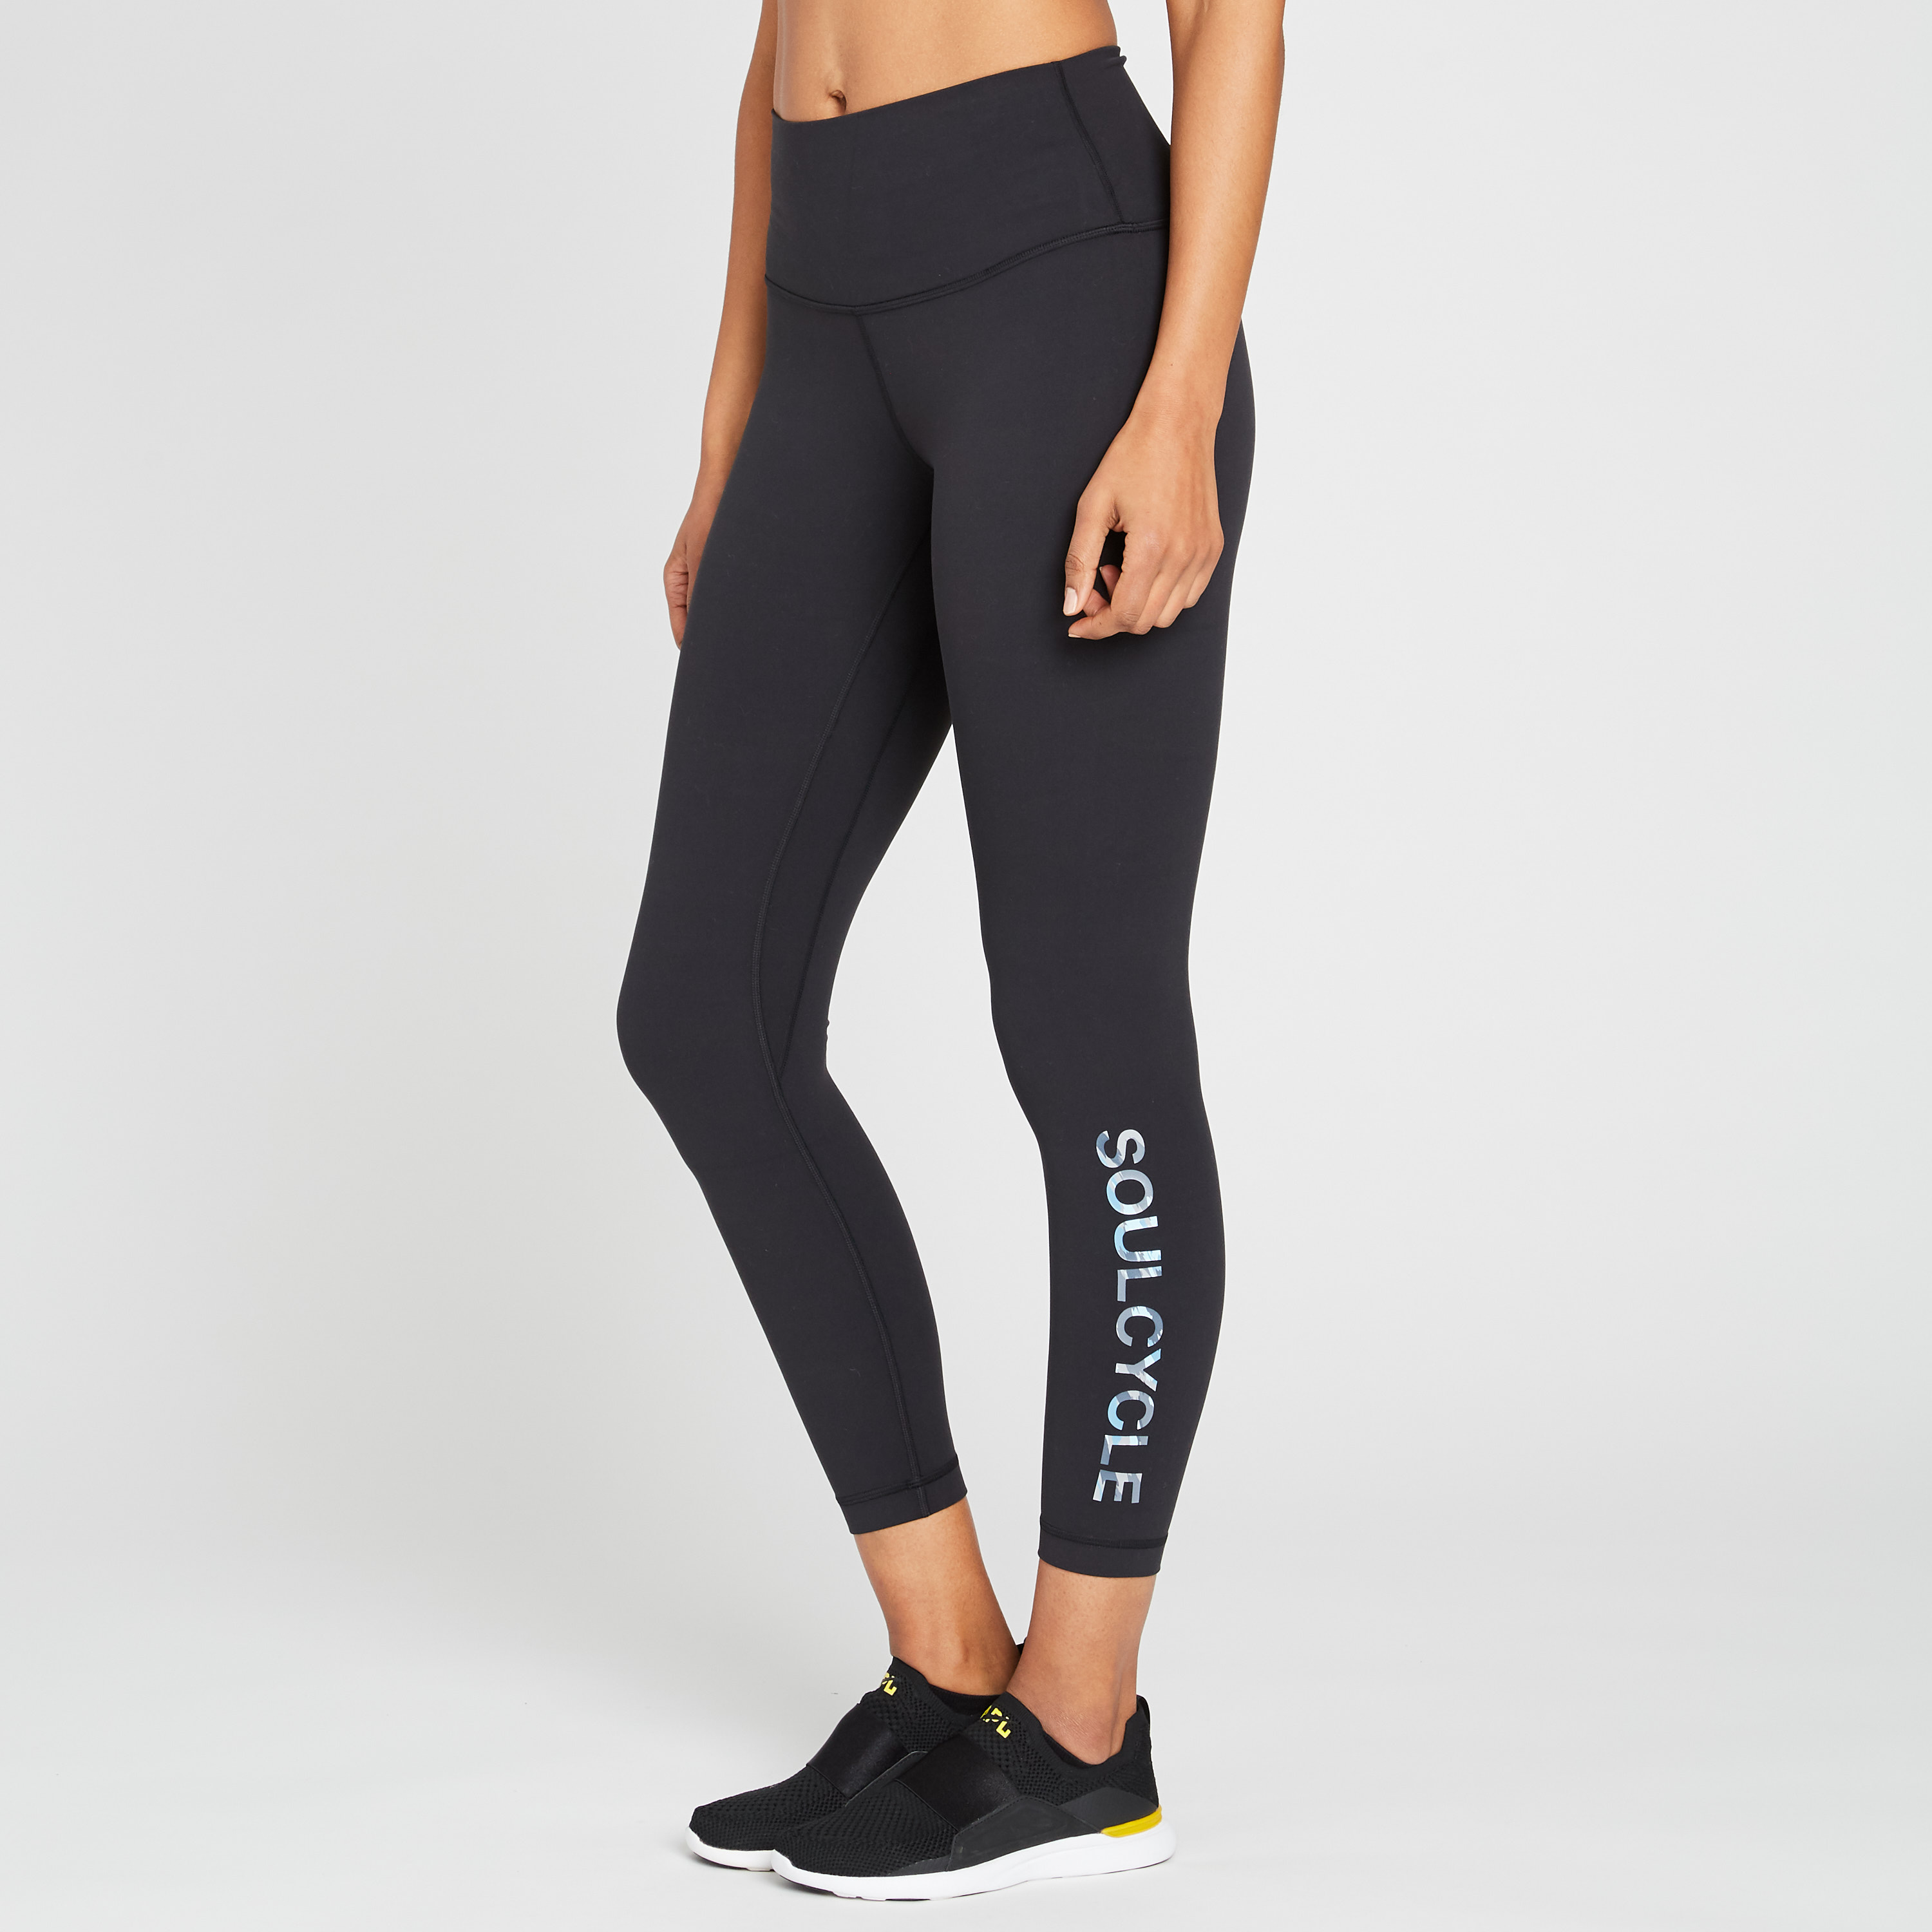 Soulcycle Lululemon Alignment International Society Of, 55% OFF